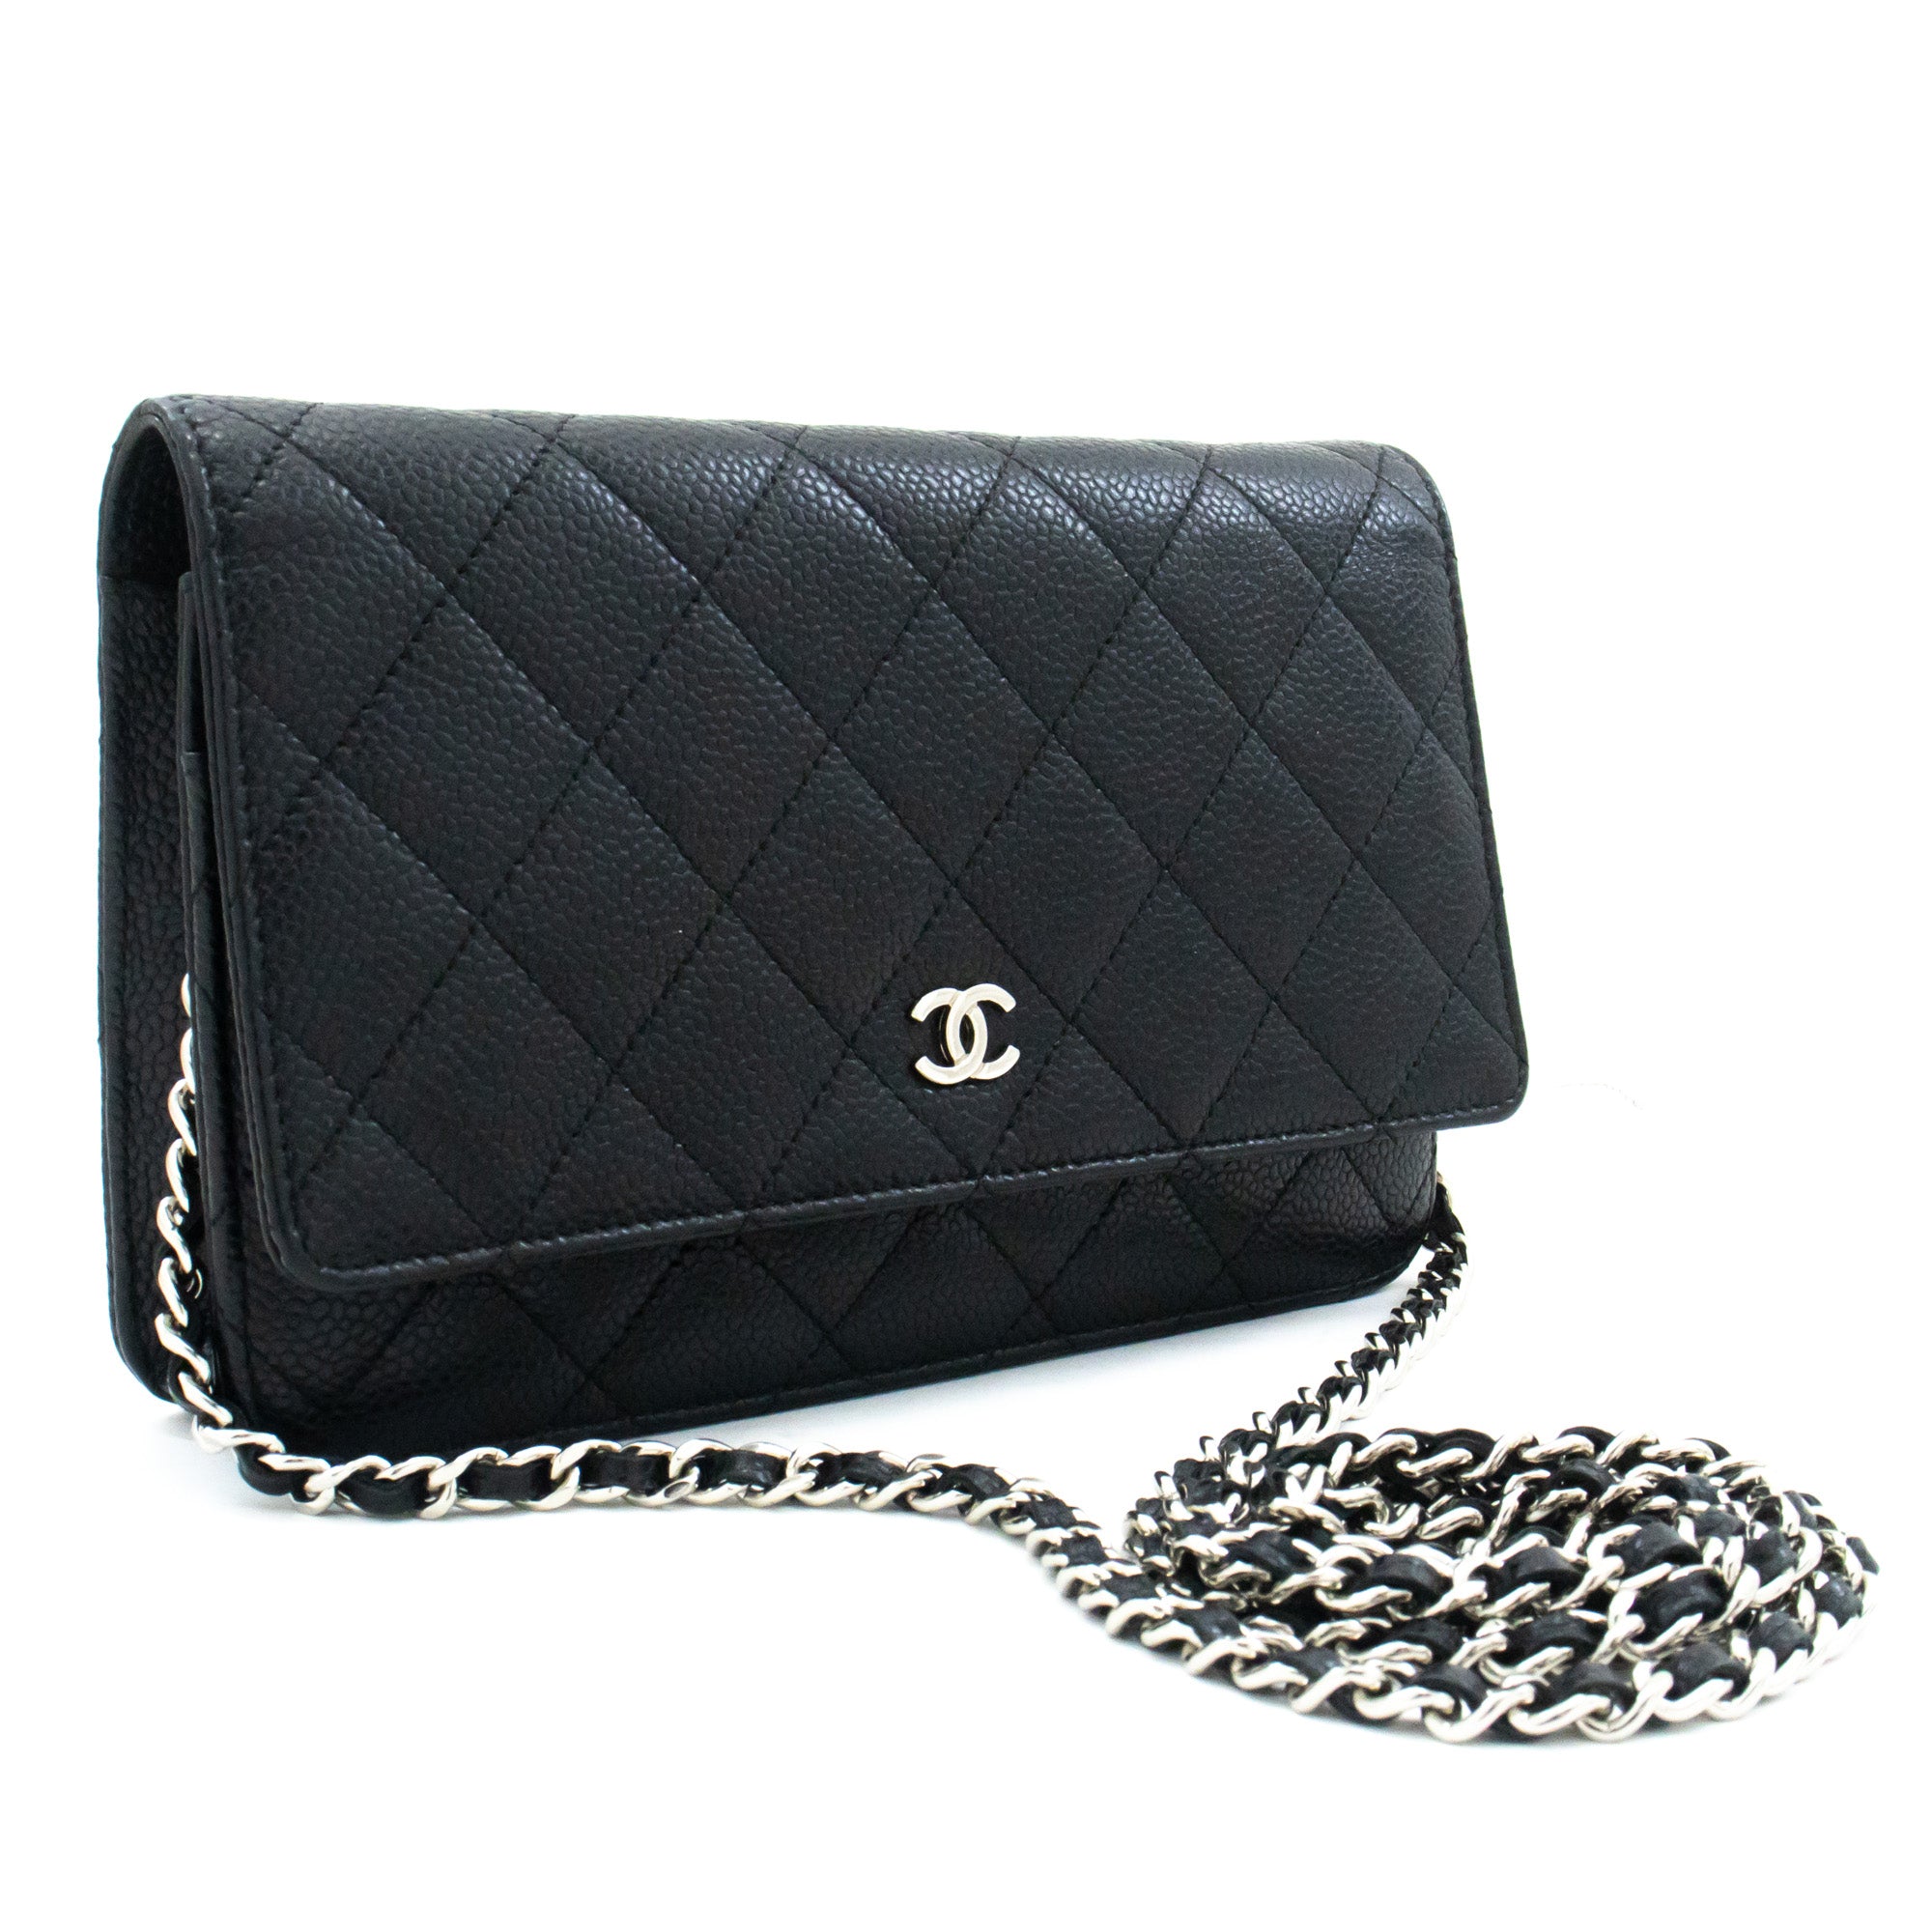 Wallet on Chain leather crossbody bag